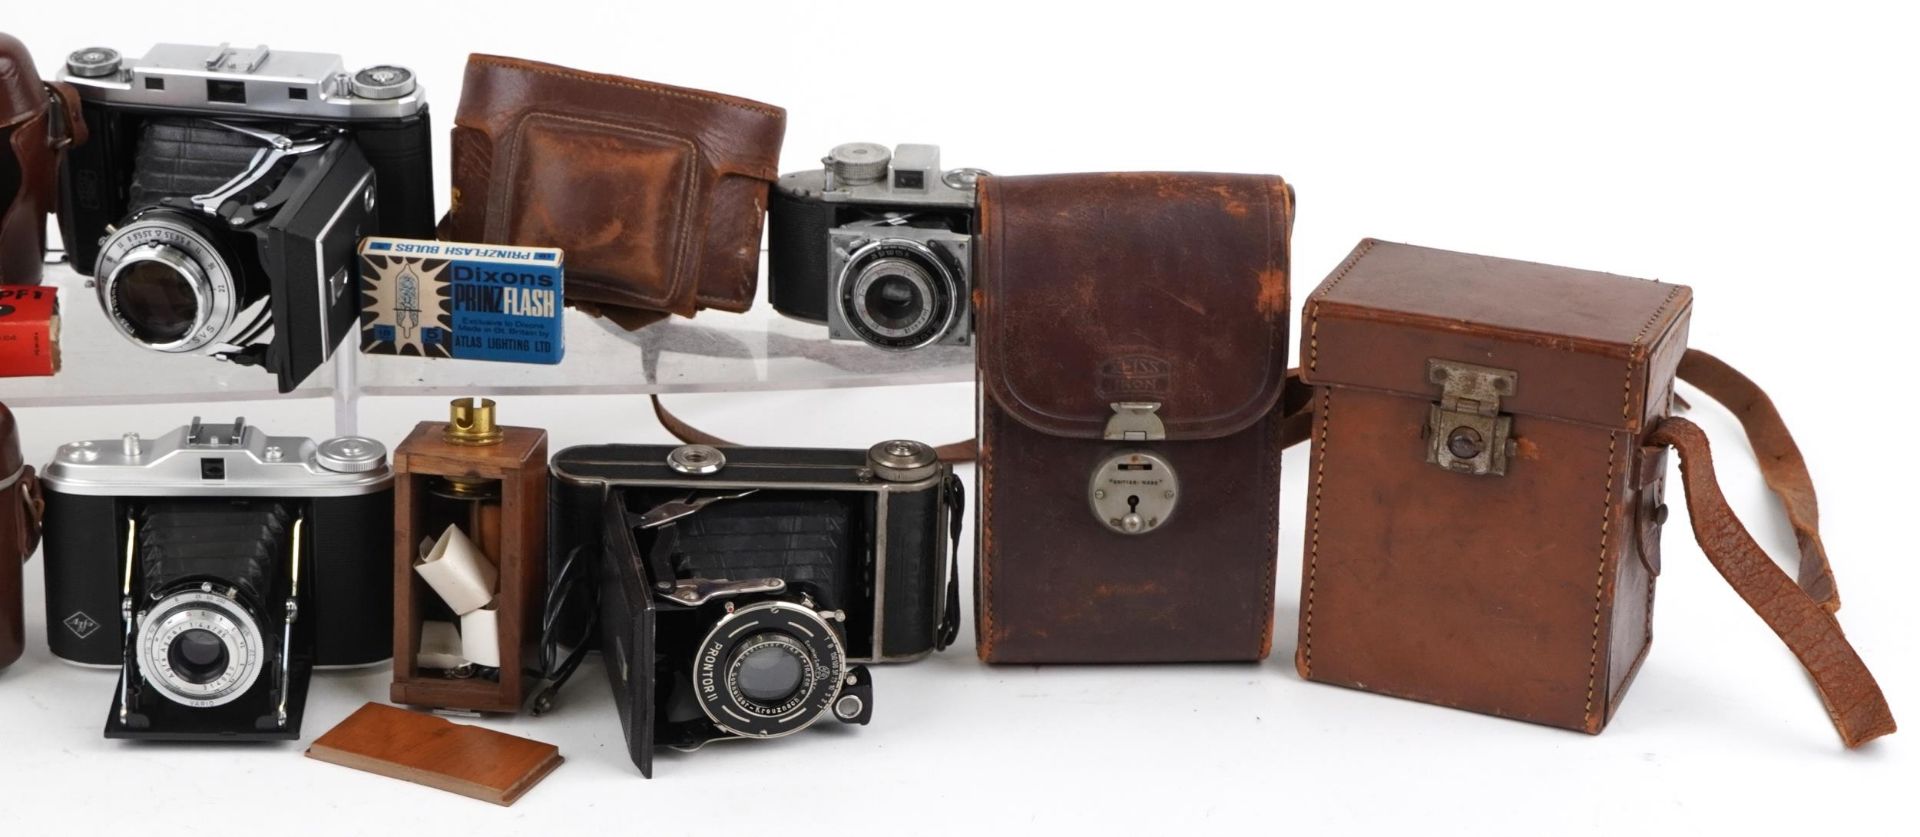 Vintage cameras and accessories including Zeiss Ikon, AGFA Isolette and Voigtlander - Image 3 of 3